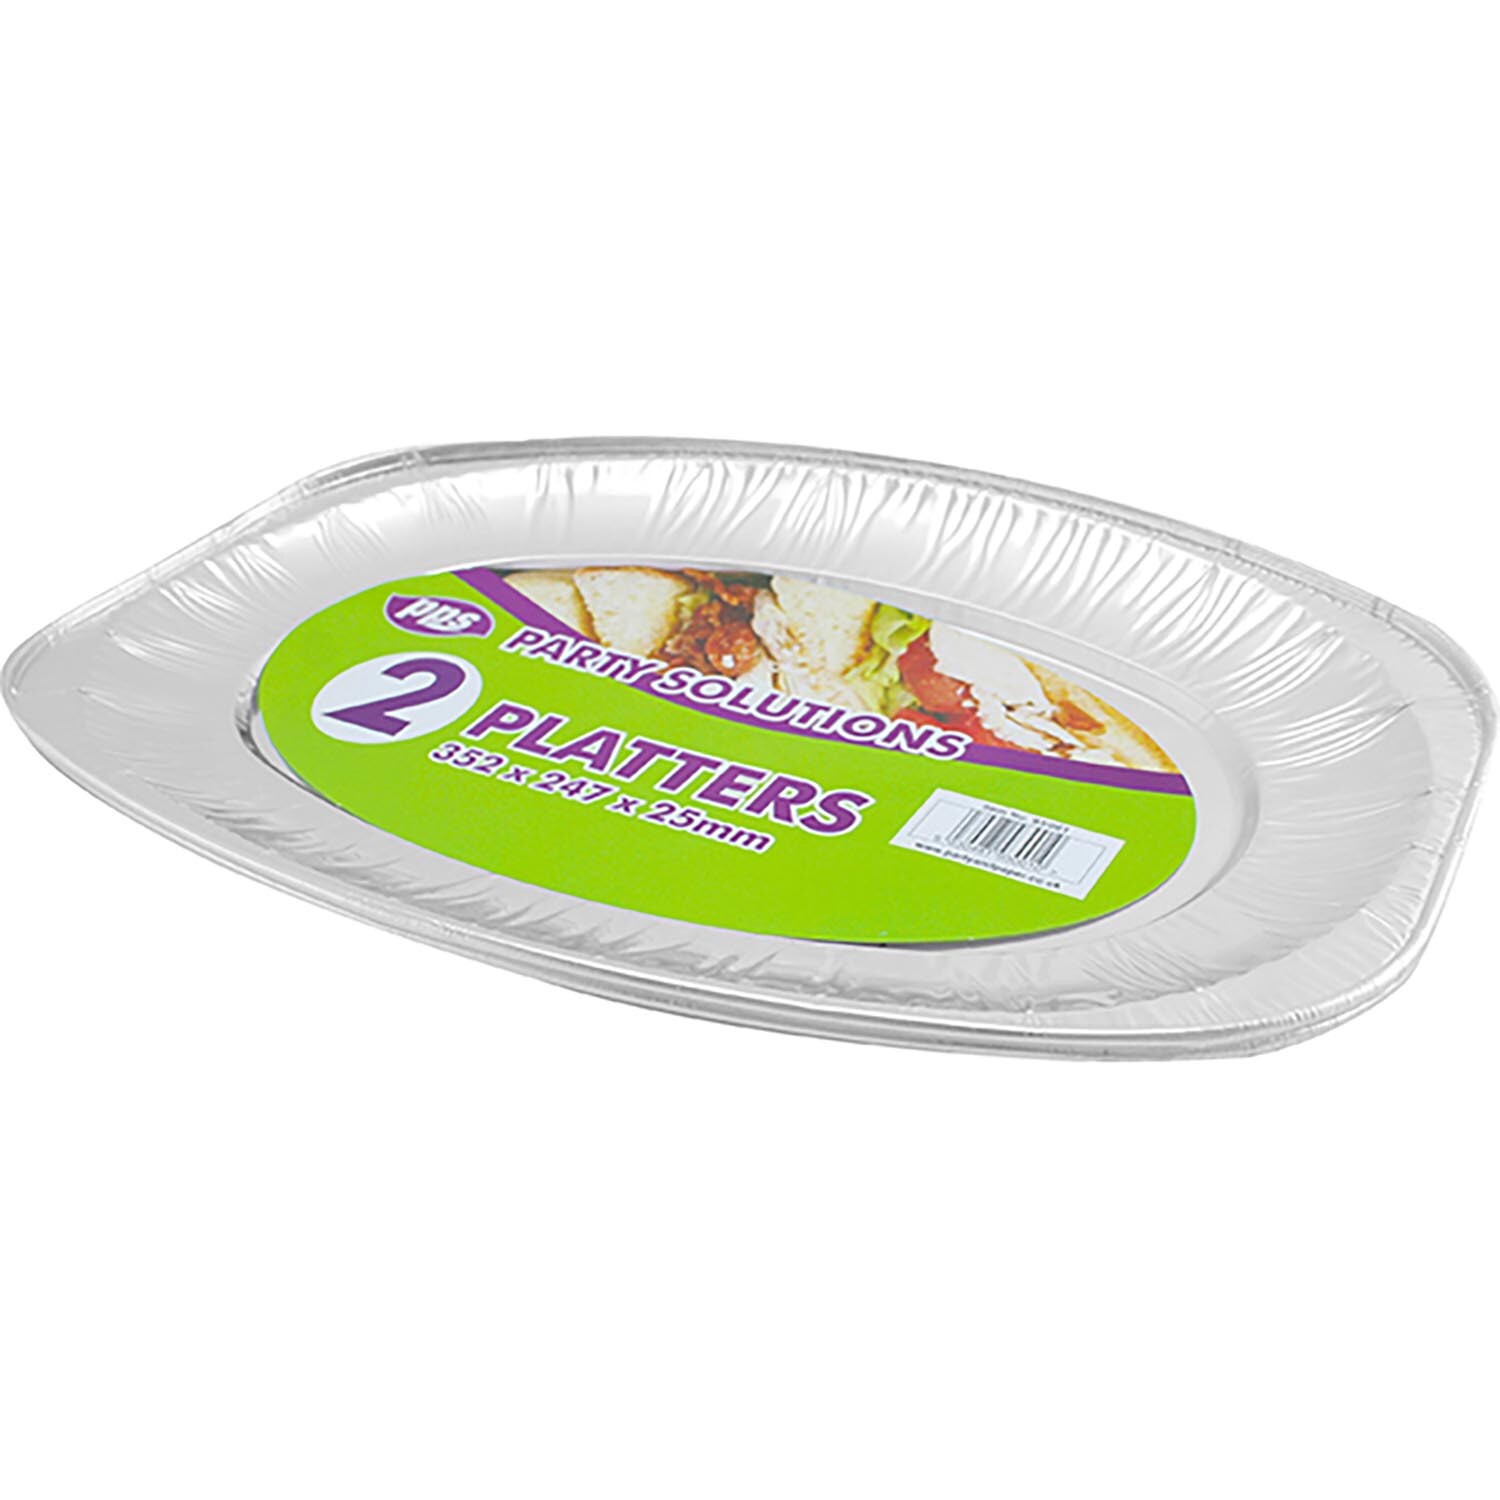 Small Foil Tray 2 Pack Image